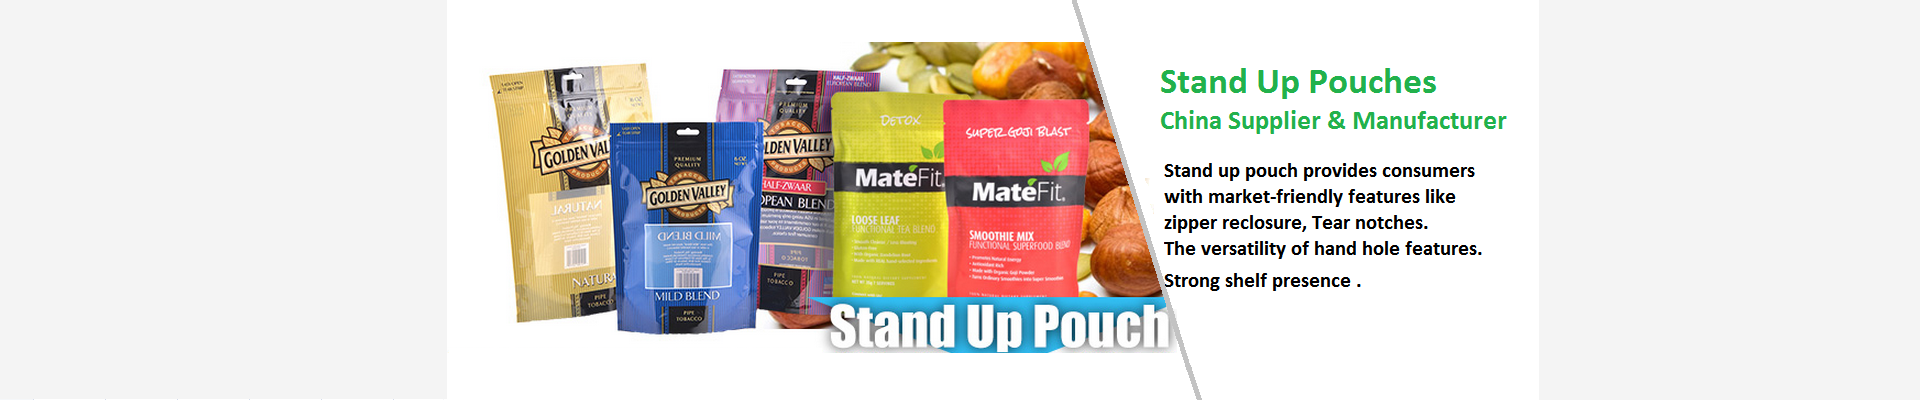 Stand Up Pouches